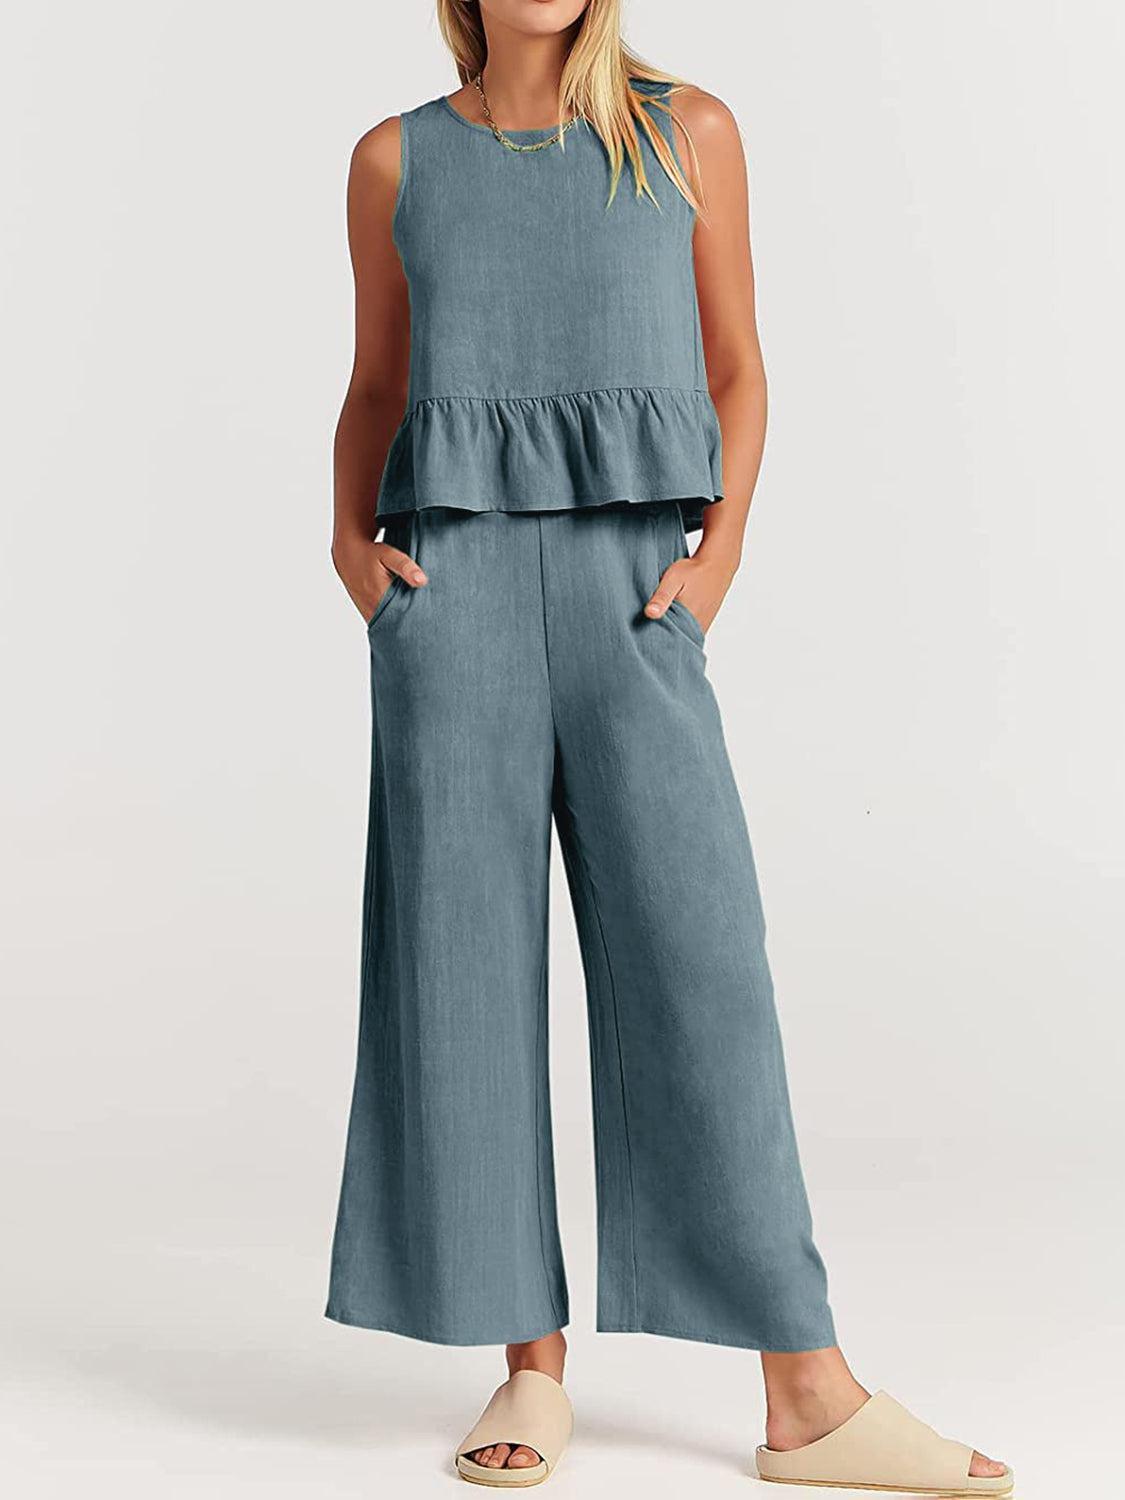 a woman wearing a blue top and wide legged pants